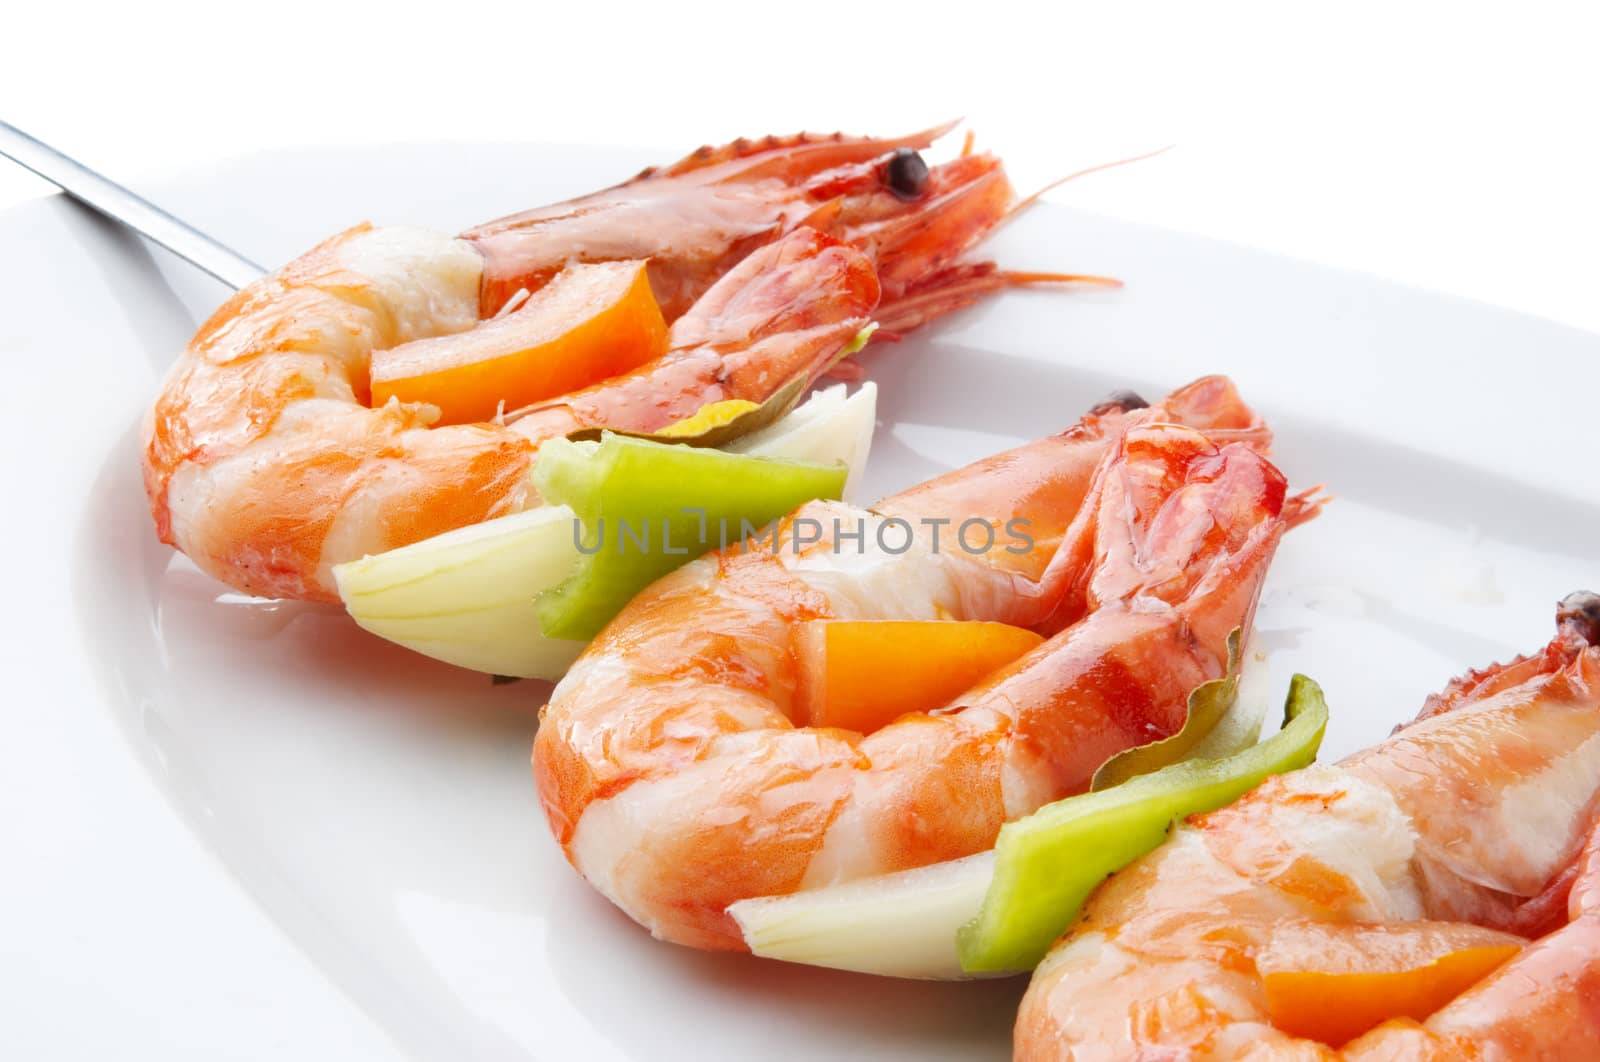 large shrimps with vegeables by starush